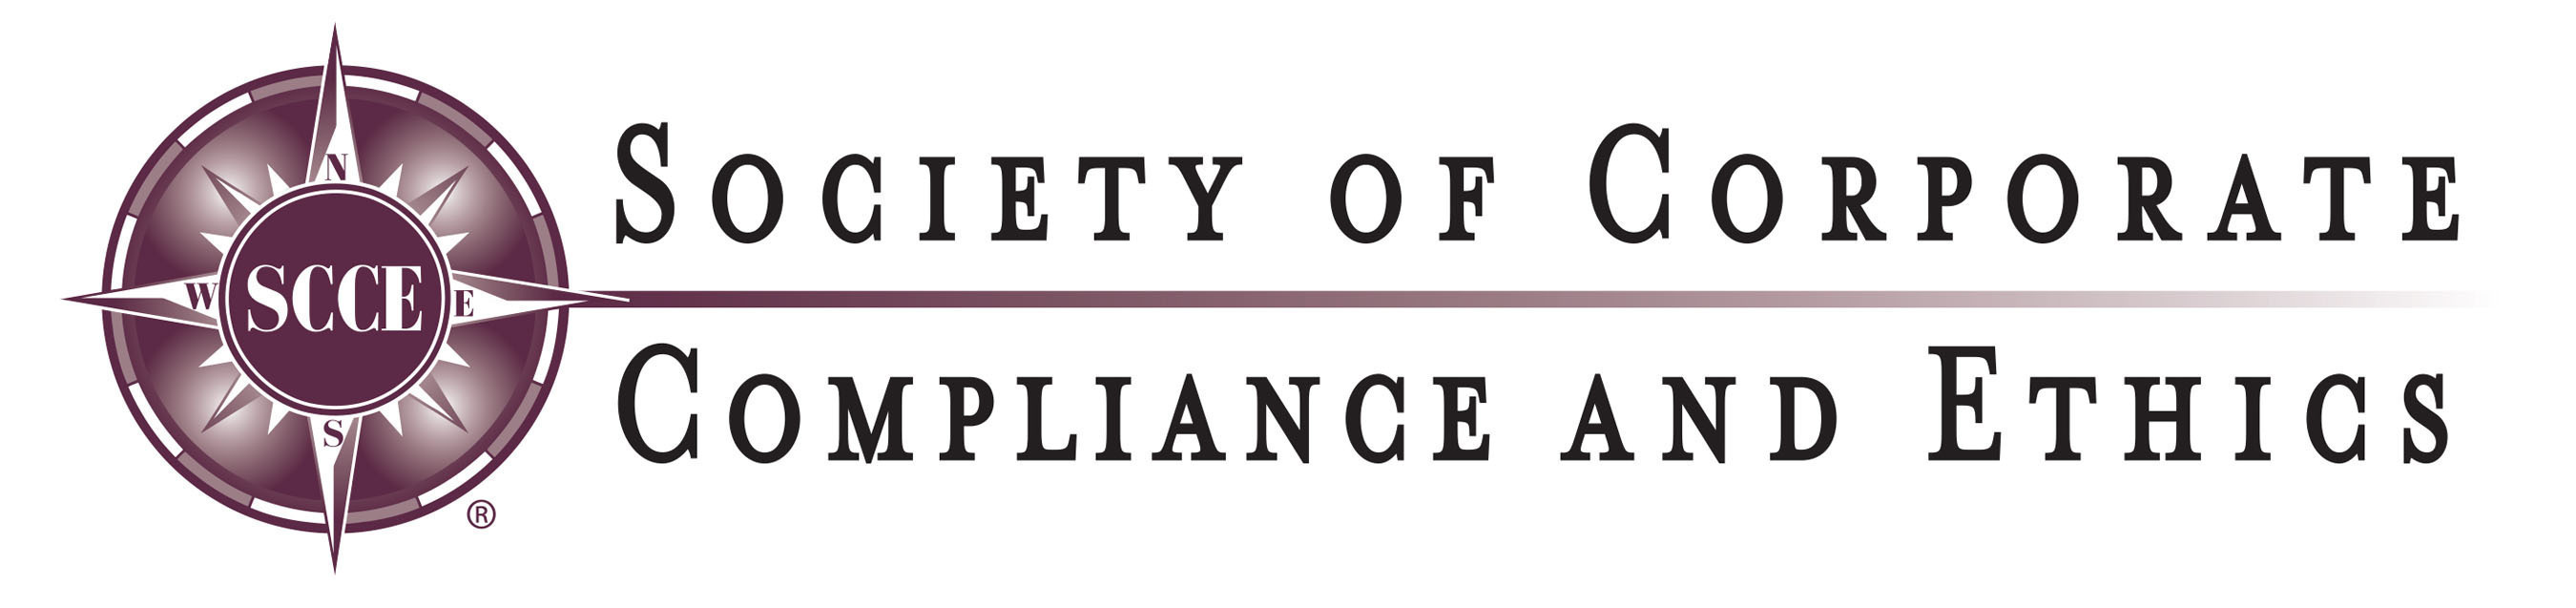 Society of Corporate Compliance and Ethics logo. (PRNewsFoto/Society of Corporate Compliance and Ethics) (PRNewsFoto/HEALTH CARE COMPLIANCE ASSOC...)